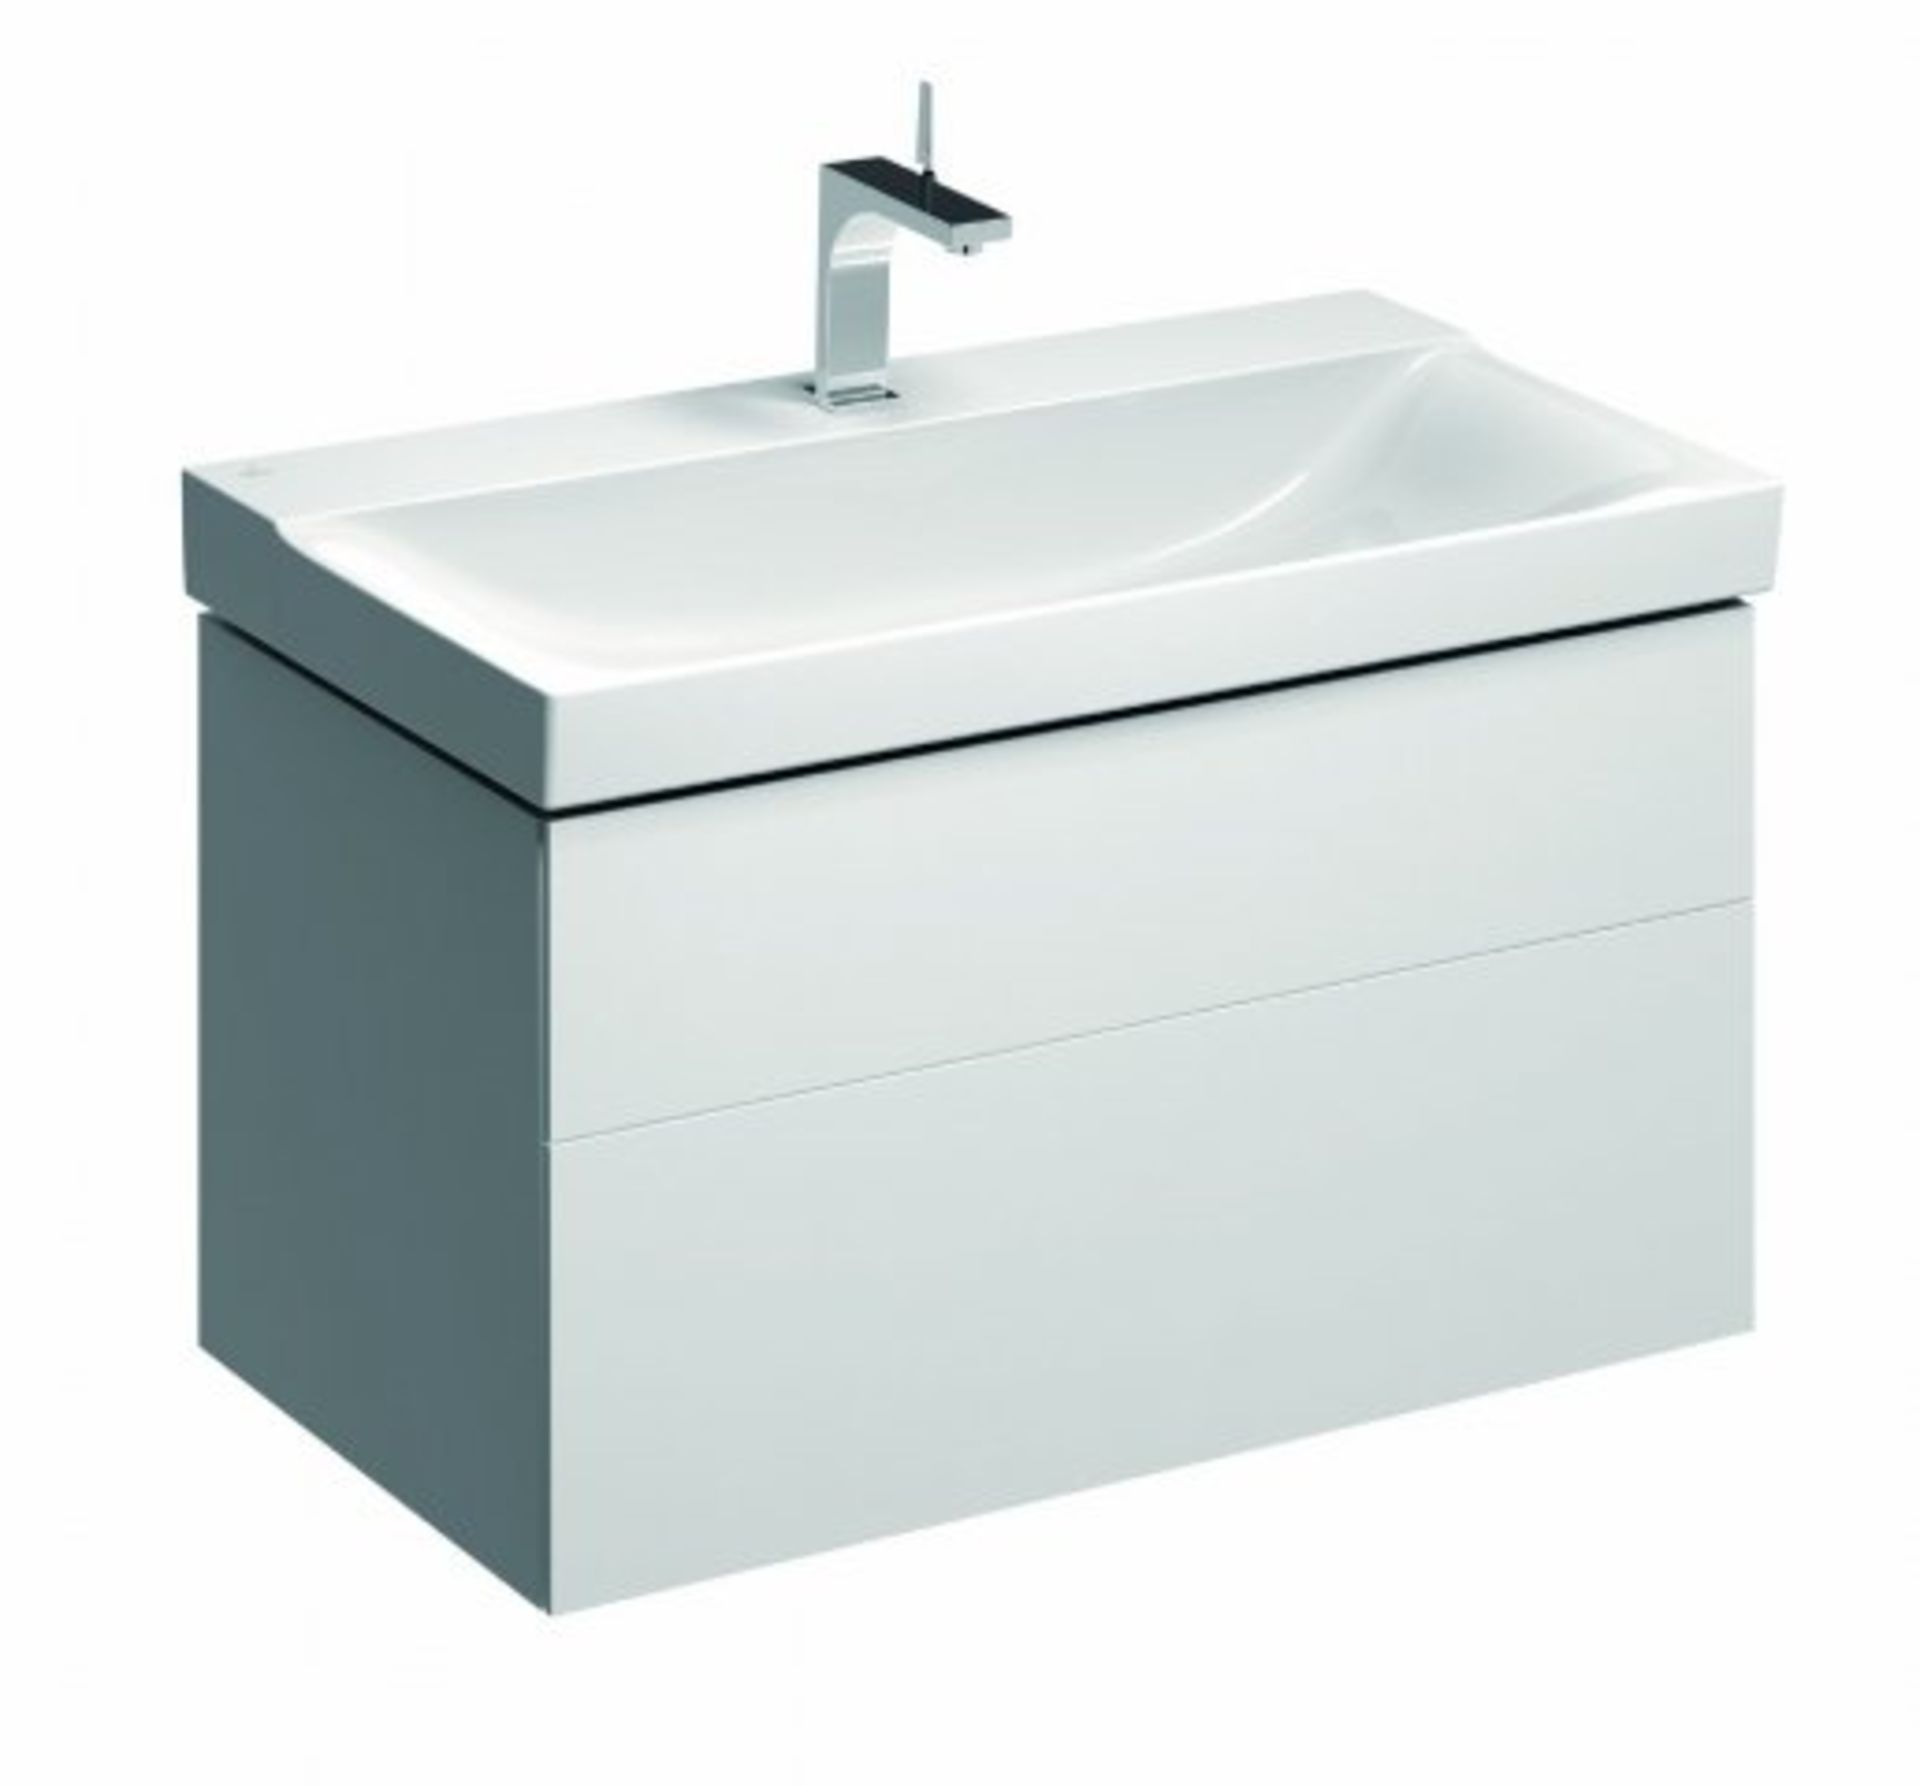 (XL11) 880mm Keramag Xeno Vanity unit. RRP £1,318.52. Comes complete with basin. 880x530x462m... - Image 3 of 3